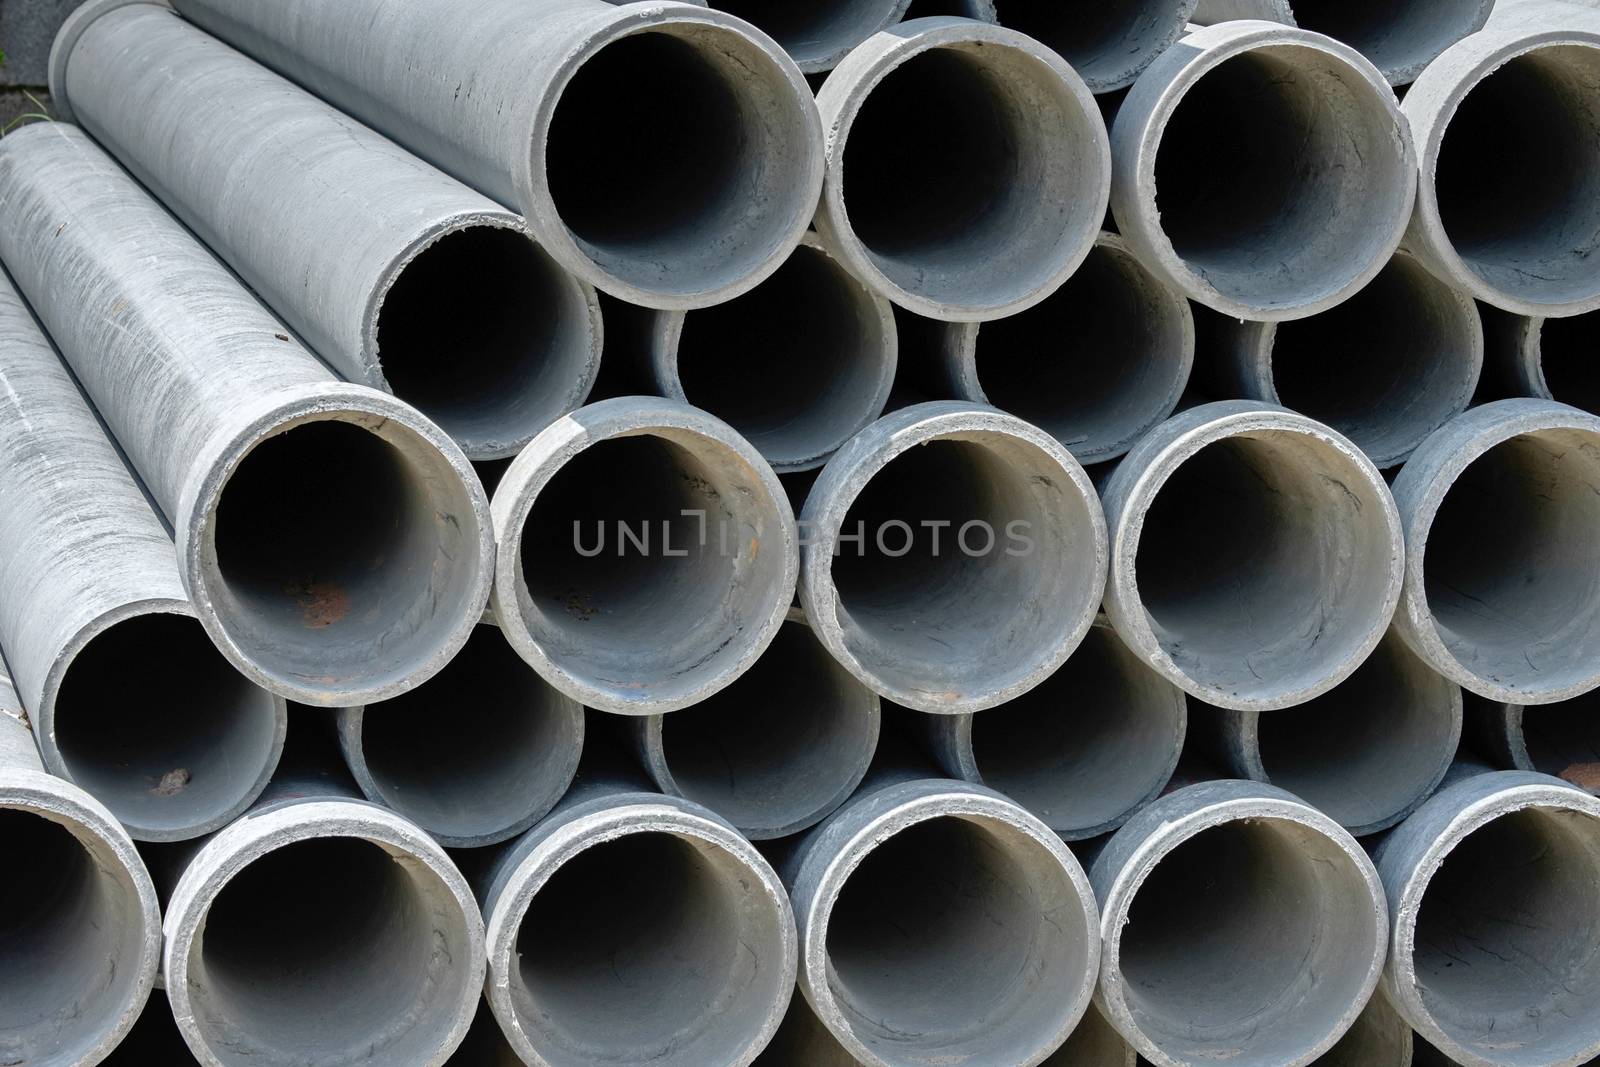 Arrange cement pipe in stock by zneb076